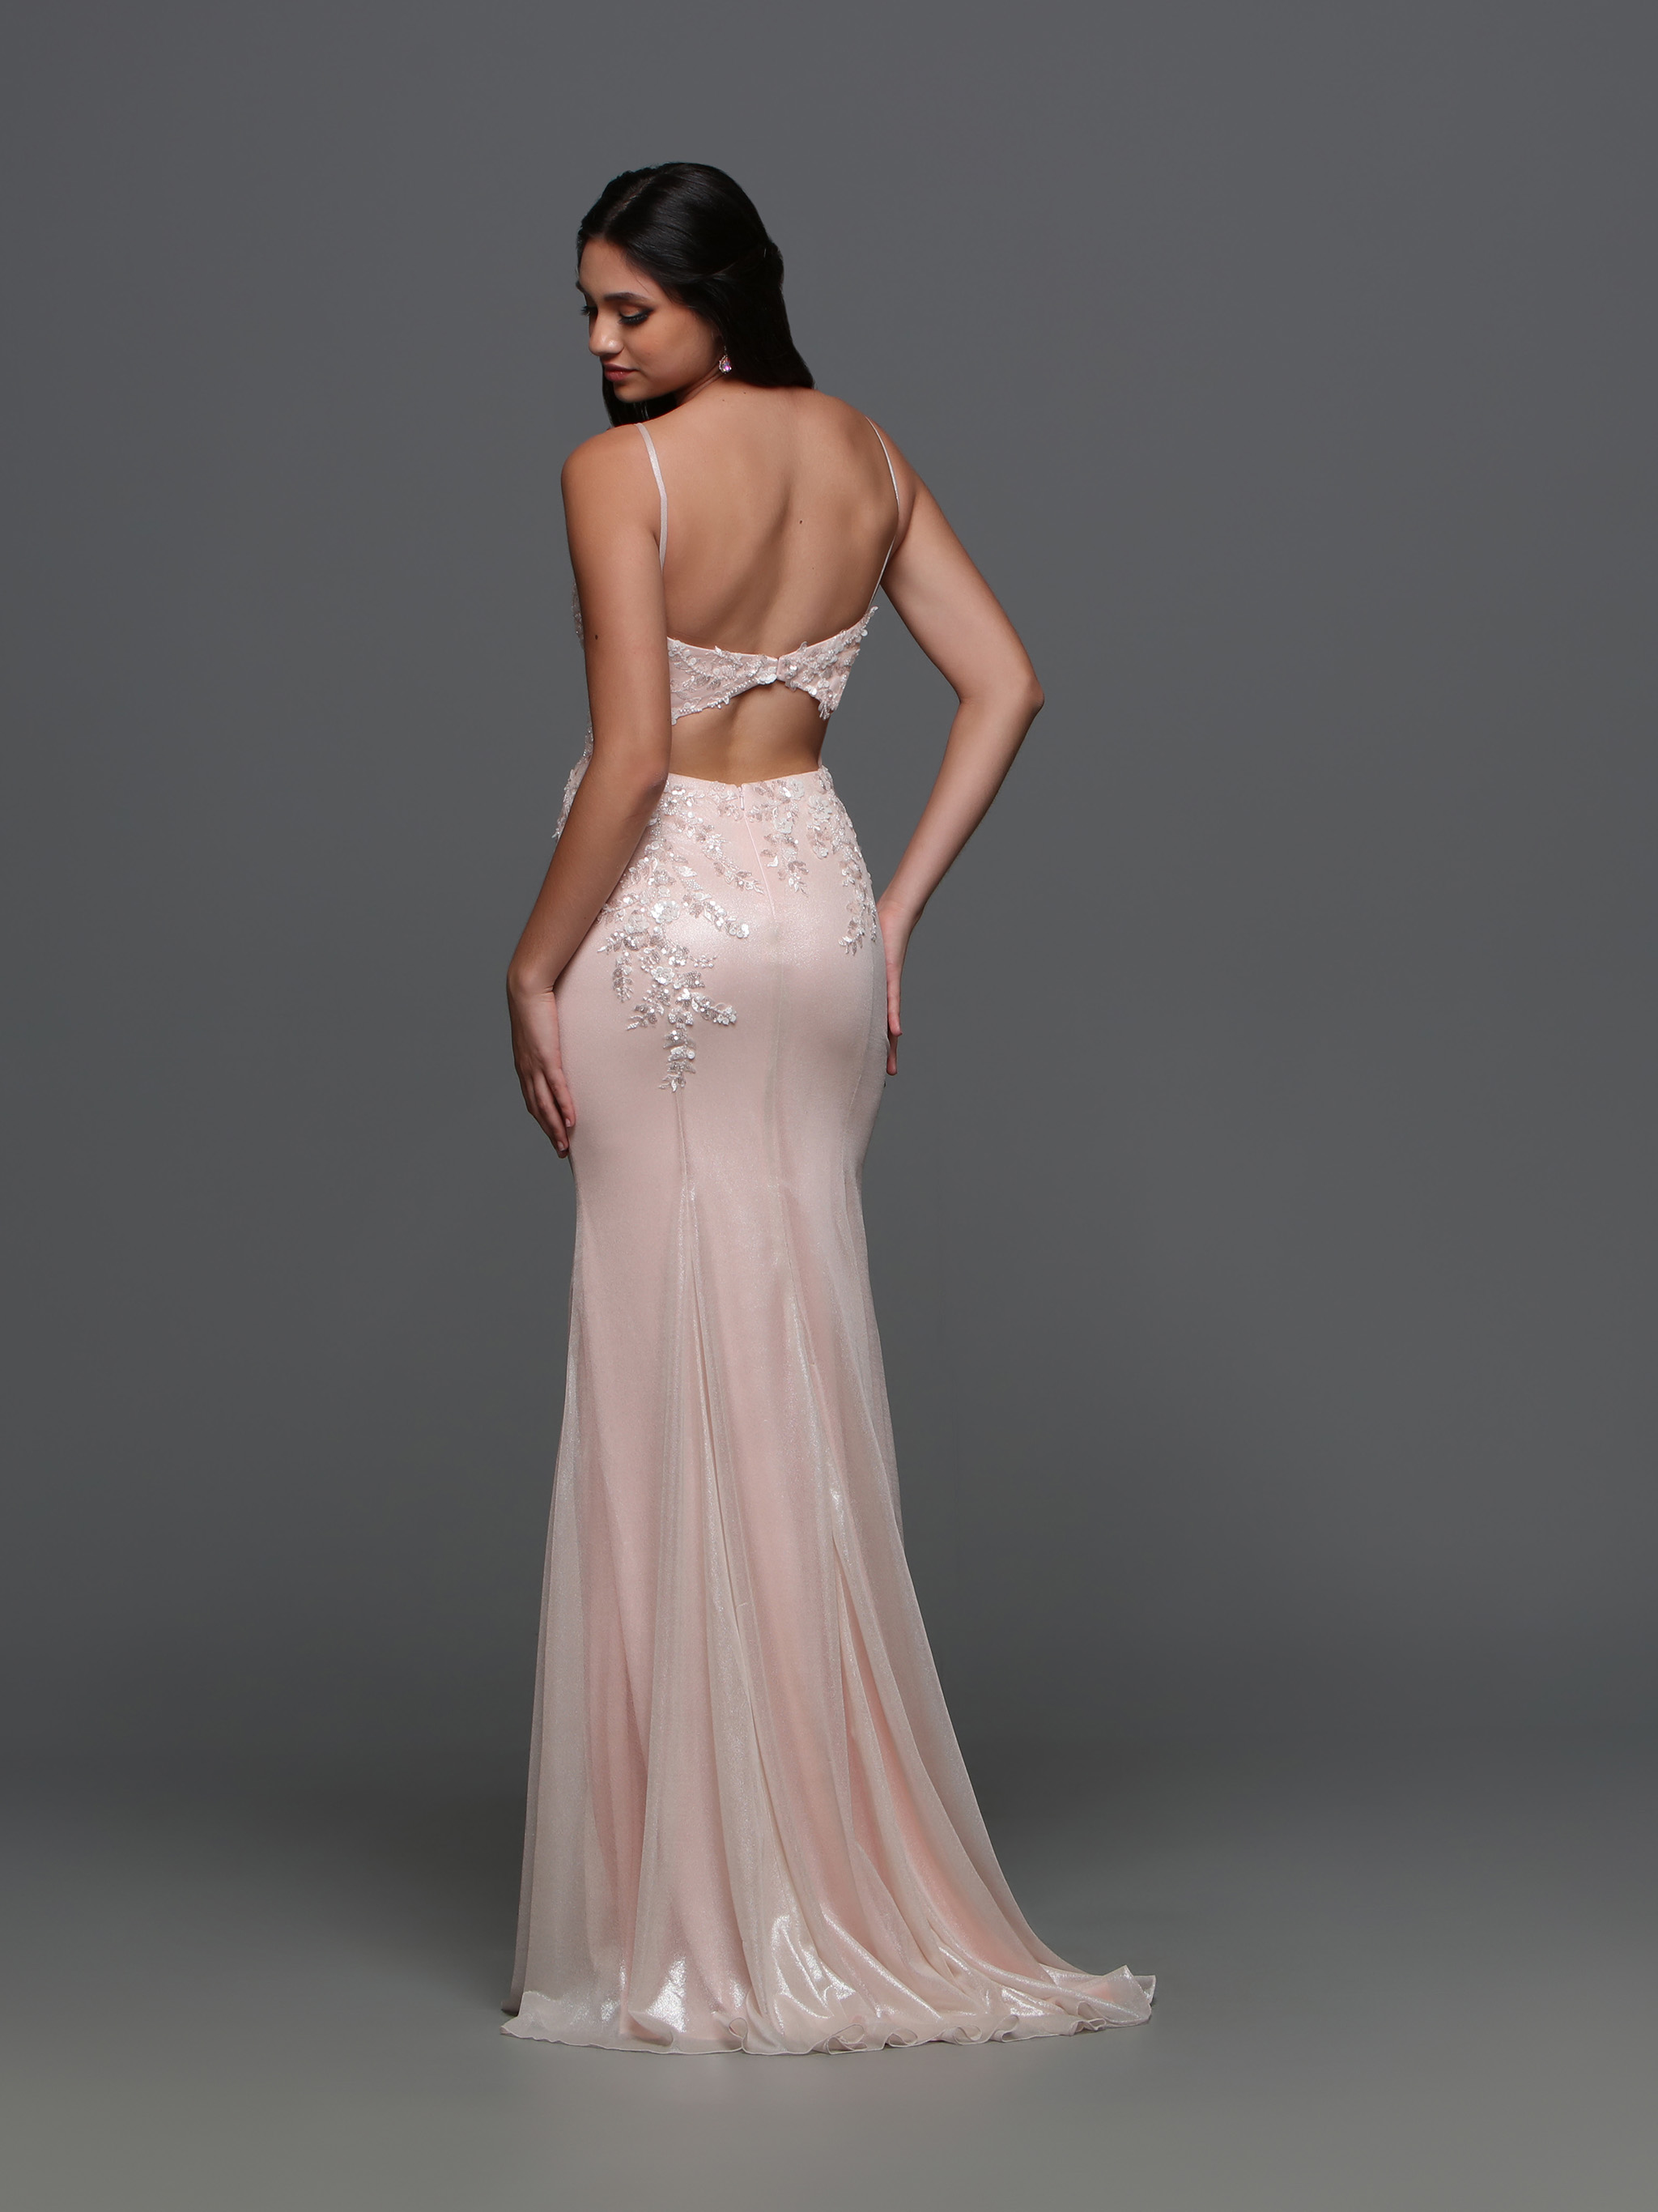 Image showing back view of style #72331